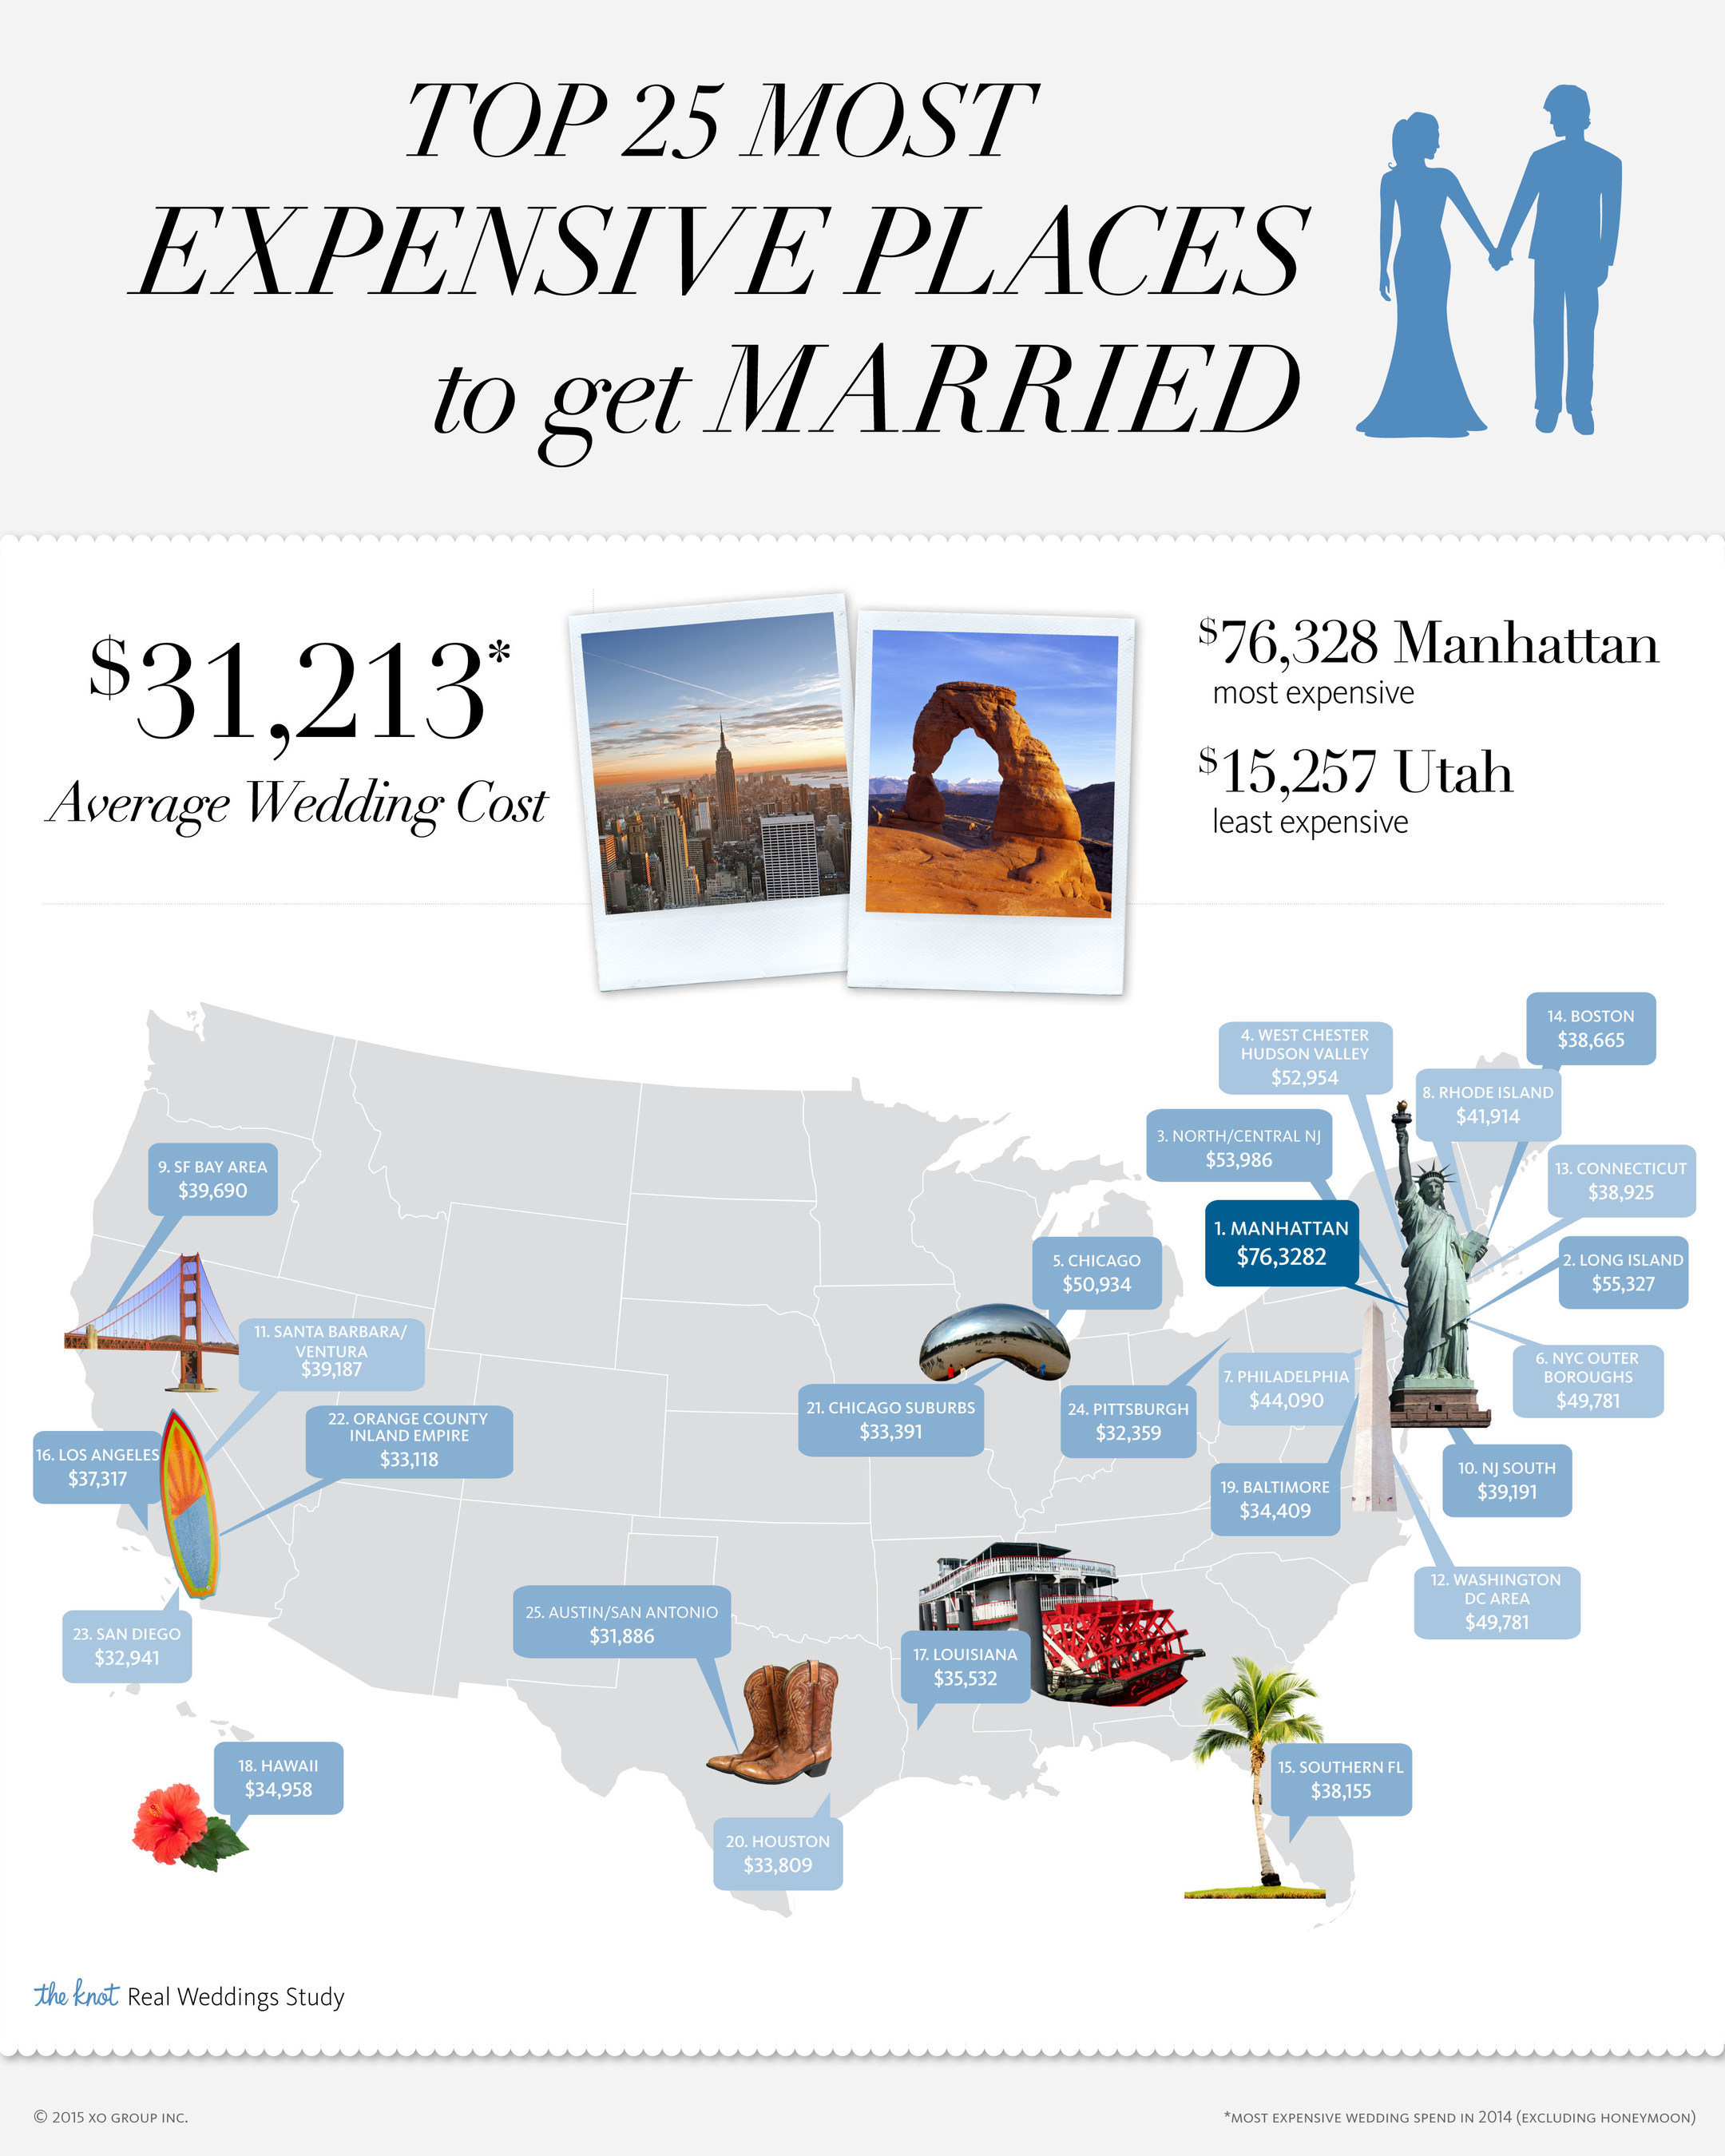 The top 25 most expensive places to get married in the US, from The Knot 2014 Real Weddings Study